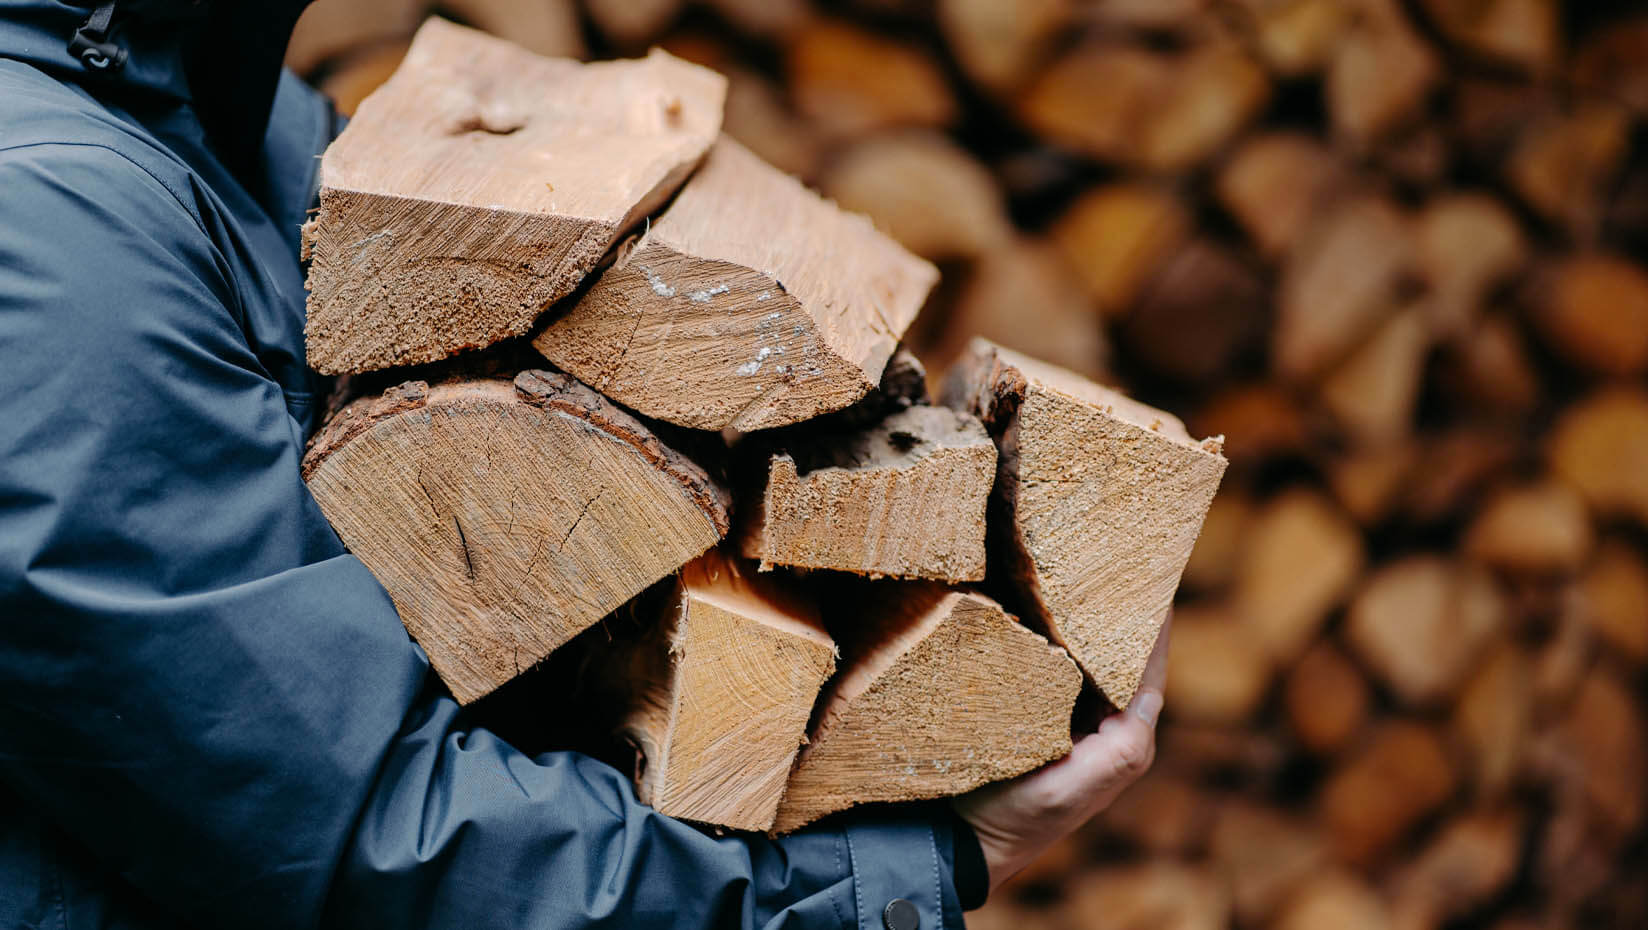 A photo of a person in a winter coat carrying split wood